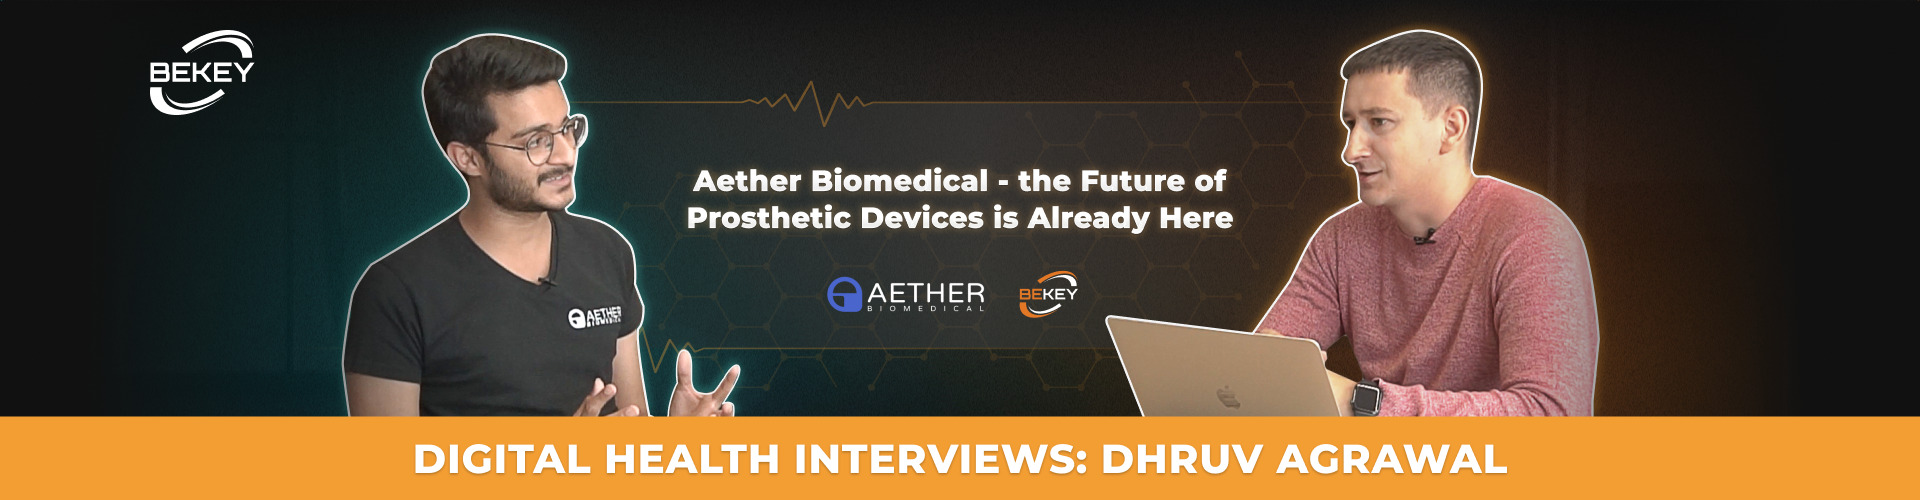 Digital Health Interviews: Dhruv Agrawal, “Aether Biomedical” — the Future of Prosthetic Devices is Already Here - image